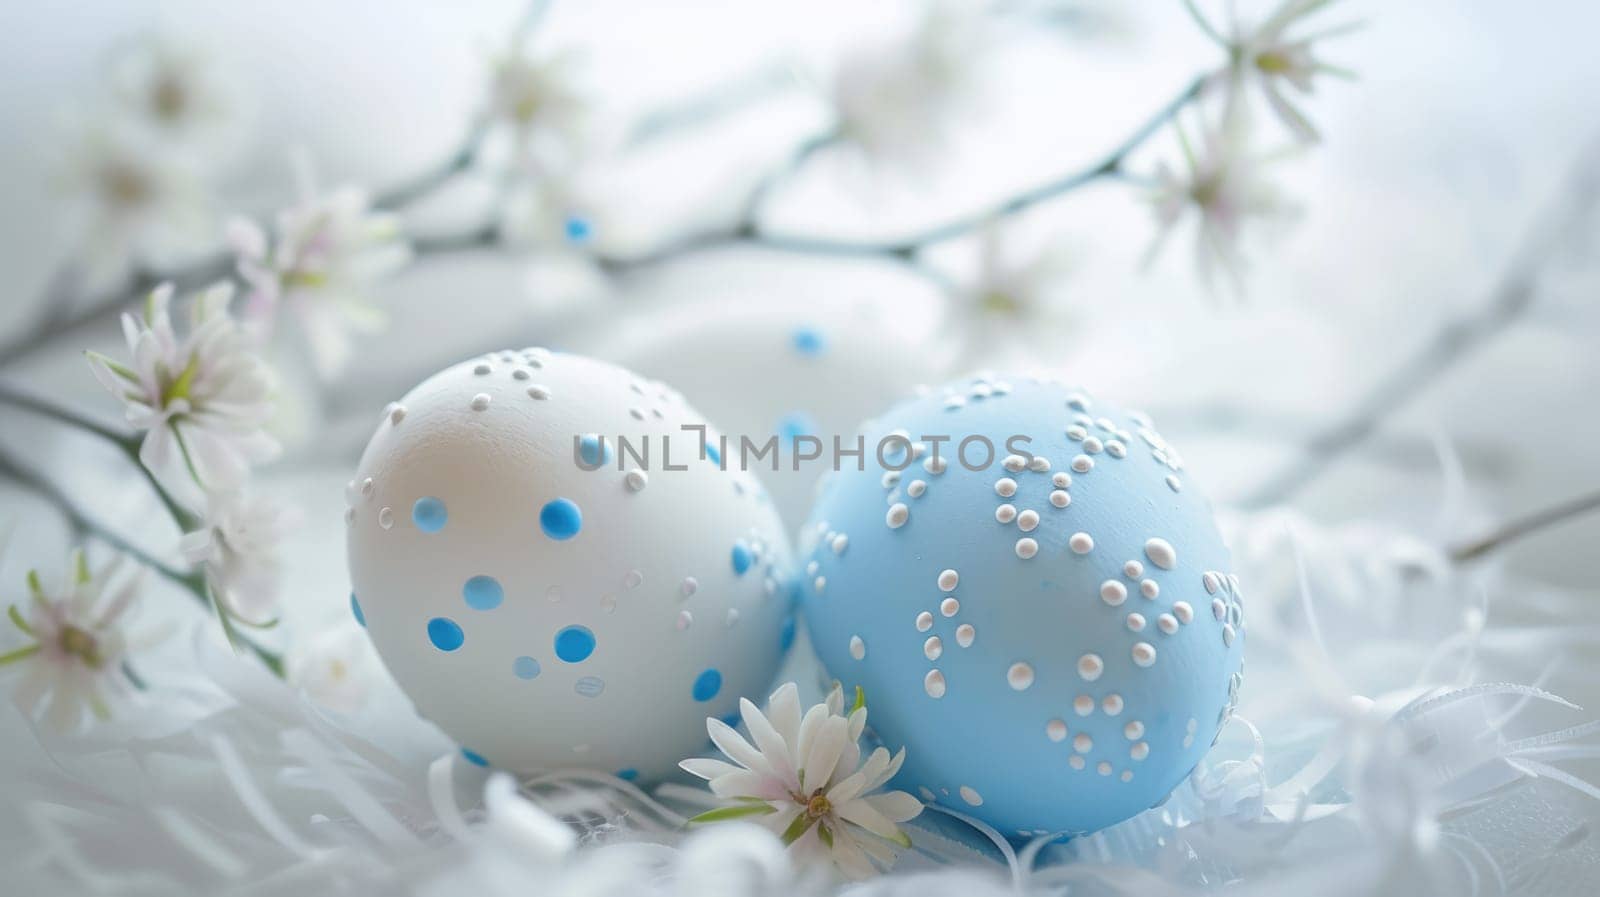 Two Blue Easter Eggs with White Polka Dots on Light Blue Background by JuliaDorian